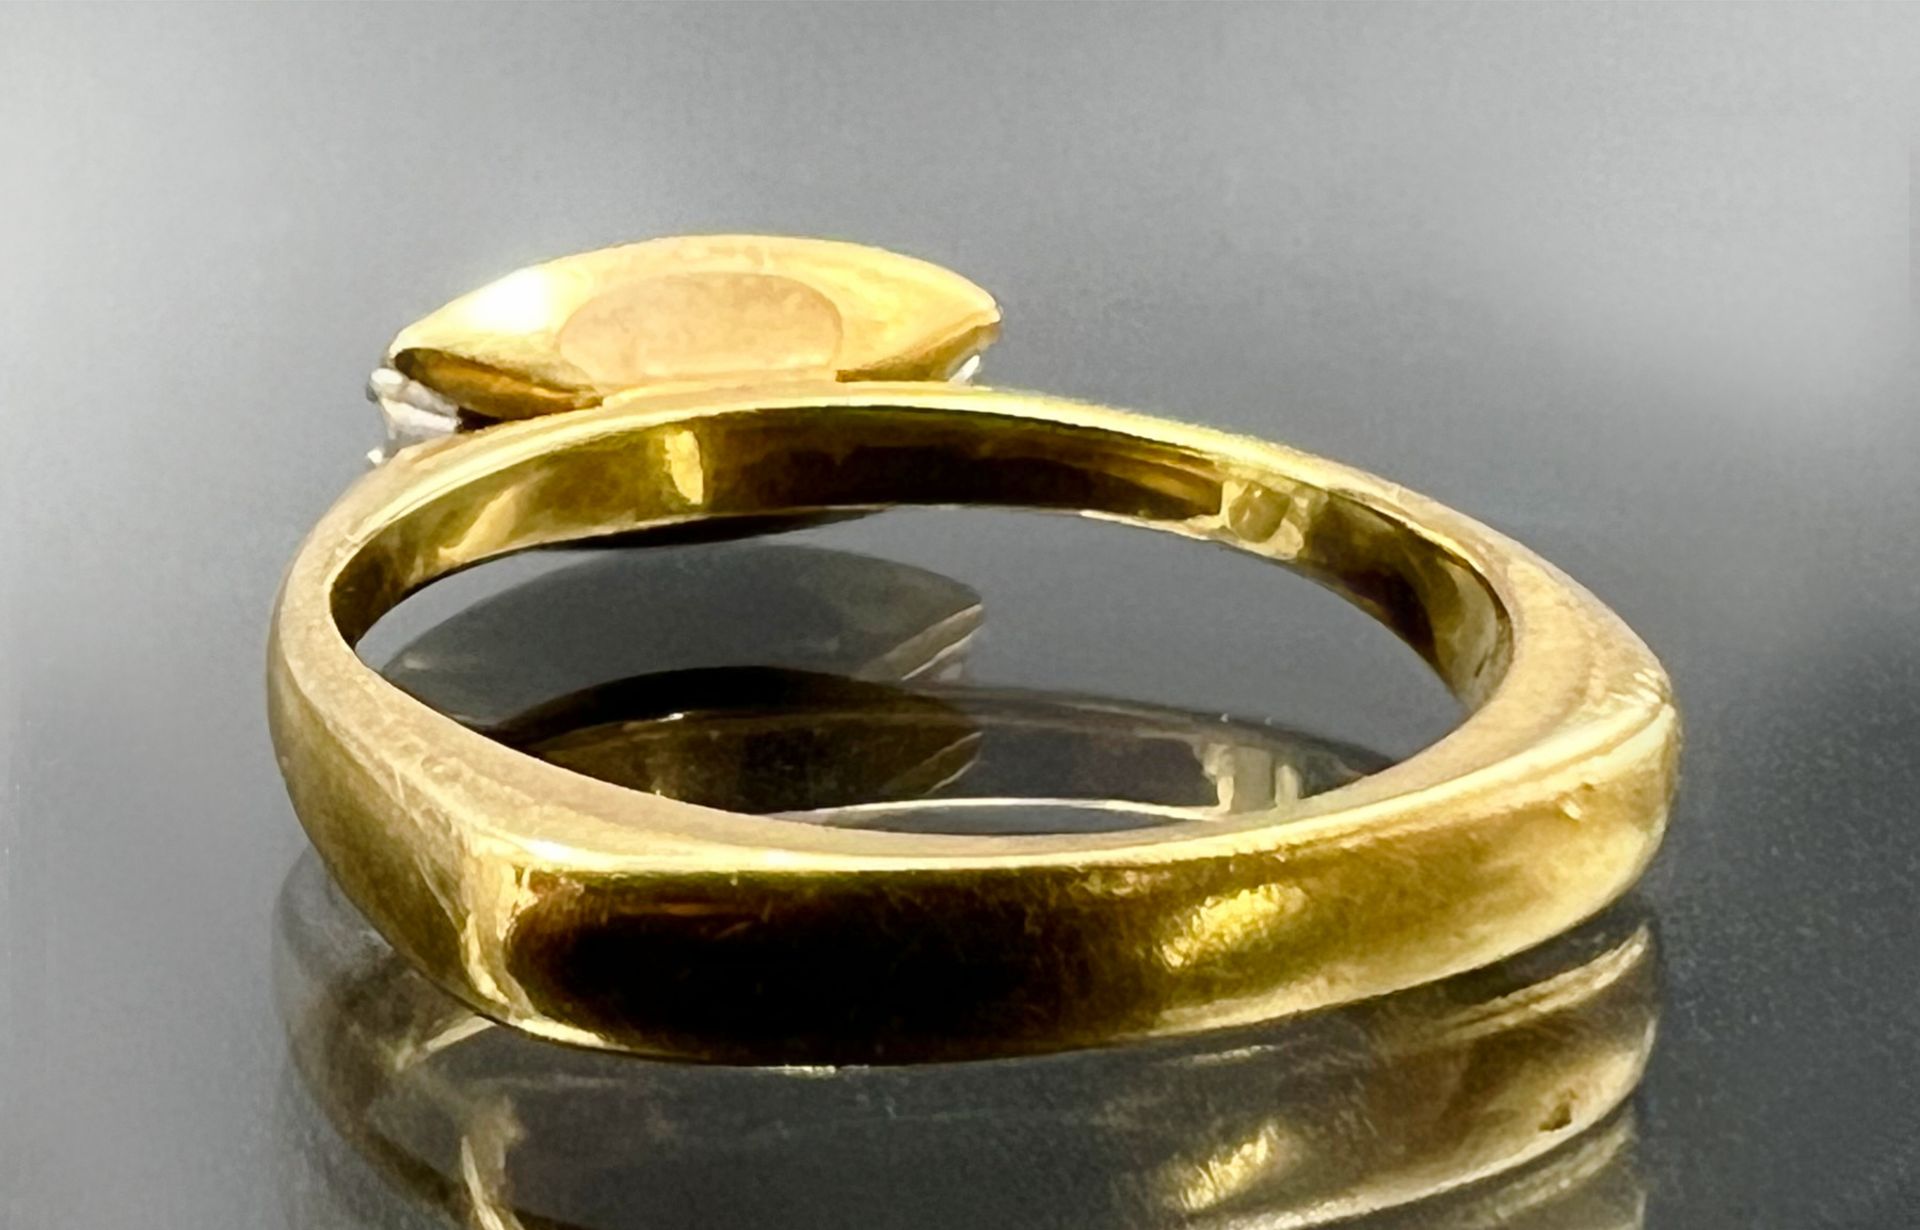 Ladies' ring 750 yellow gold with 4 diamonds. - Image 3 of 7